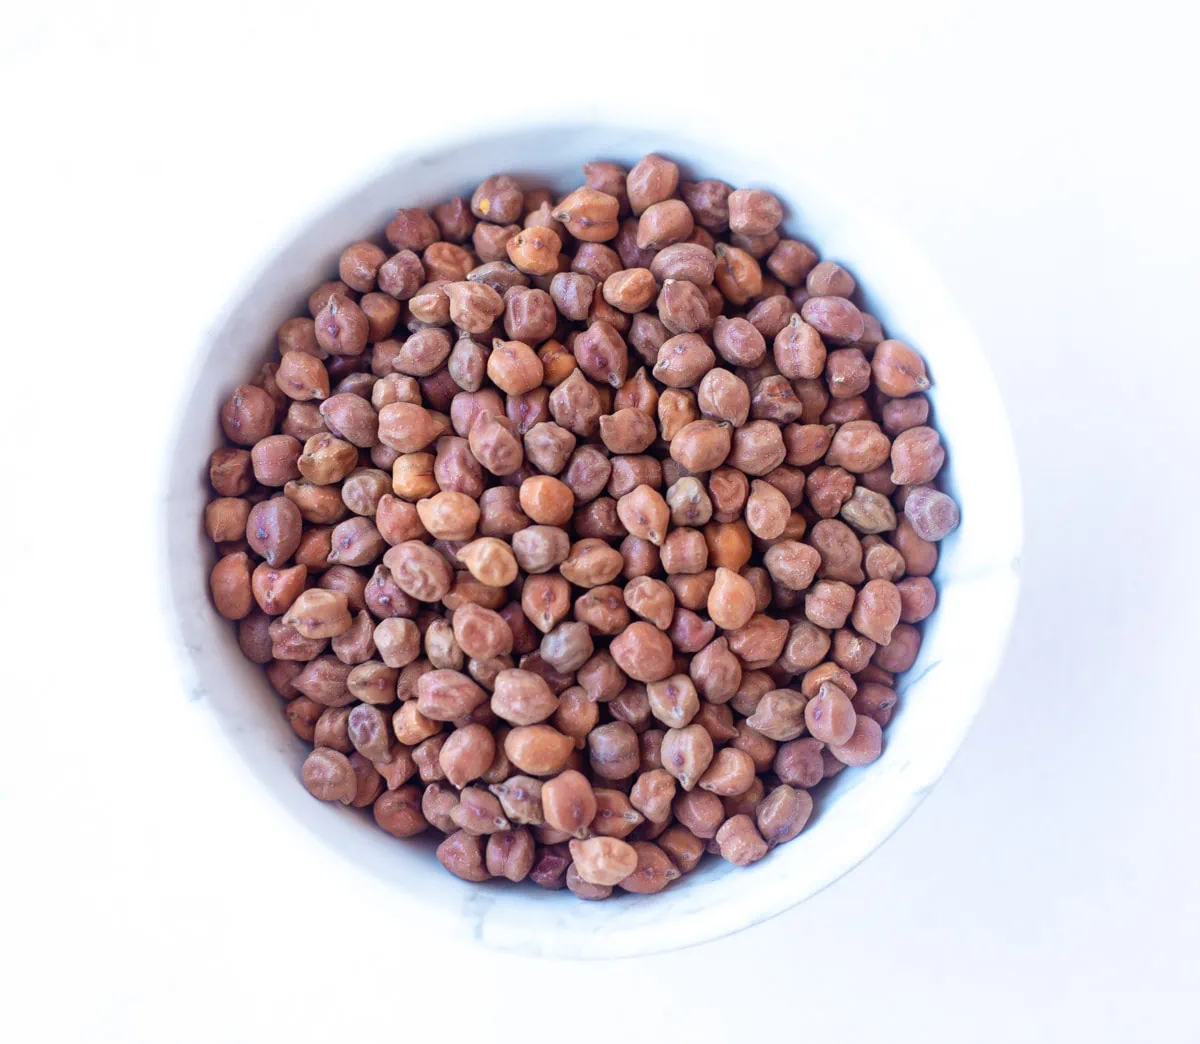 Black Chickpea, also called Kala Chana in a white bowl